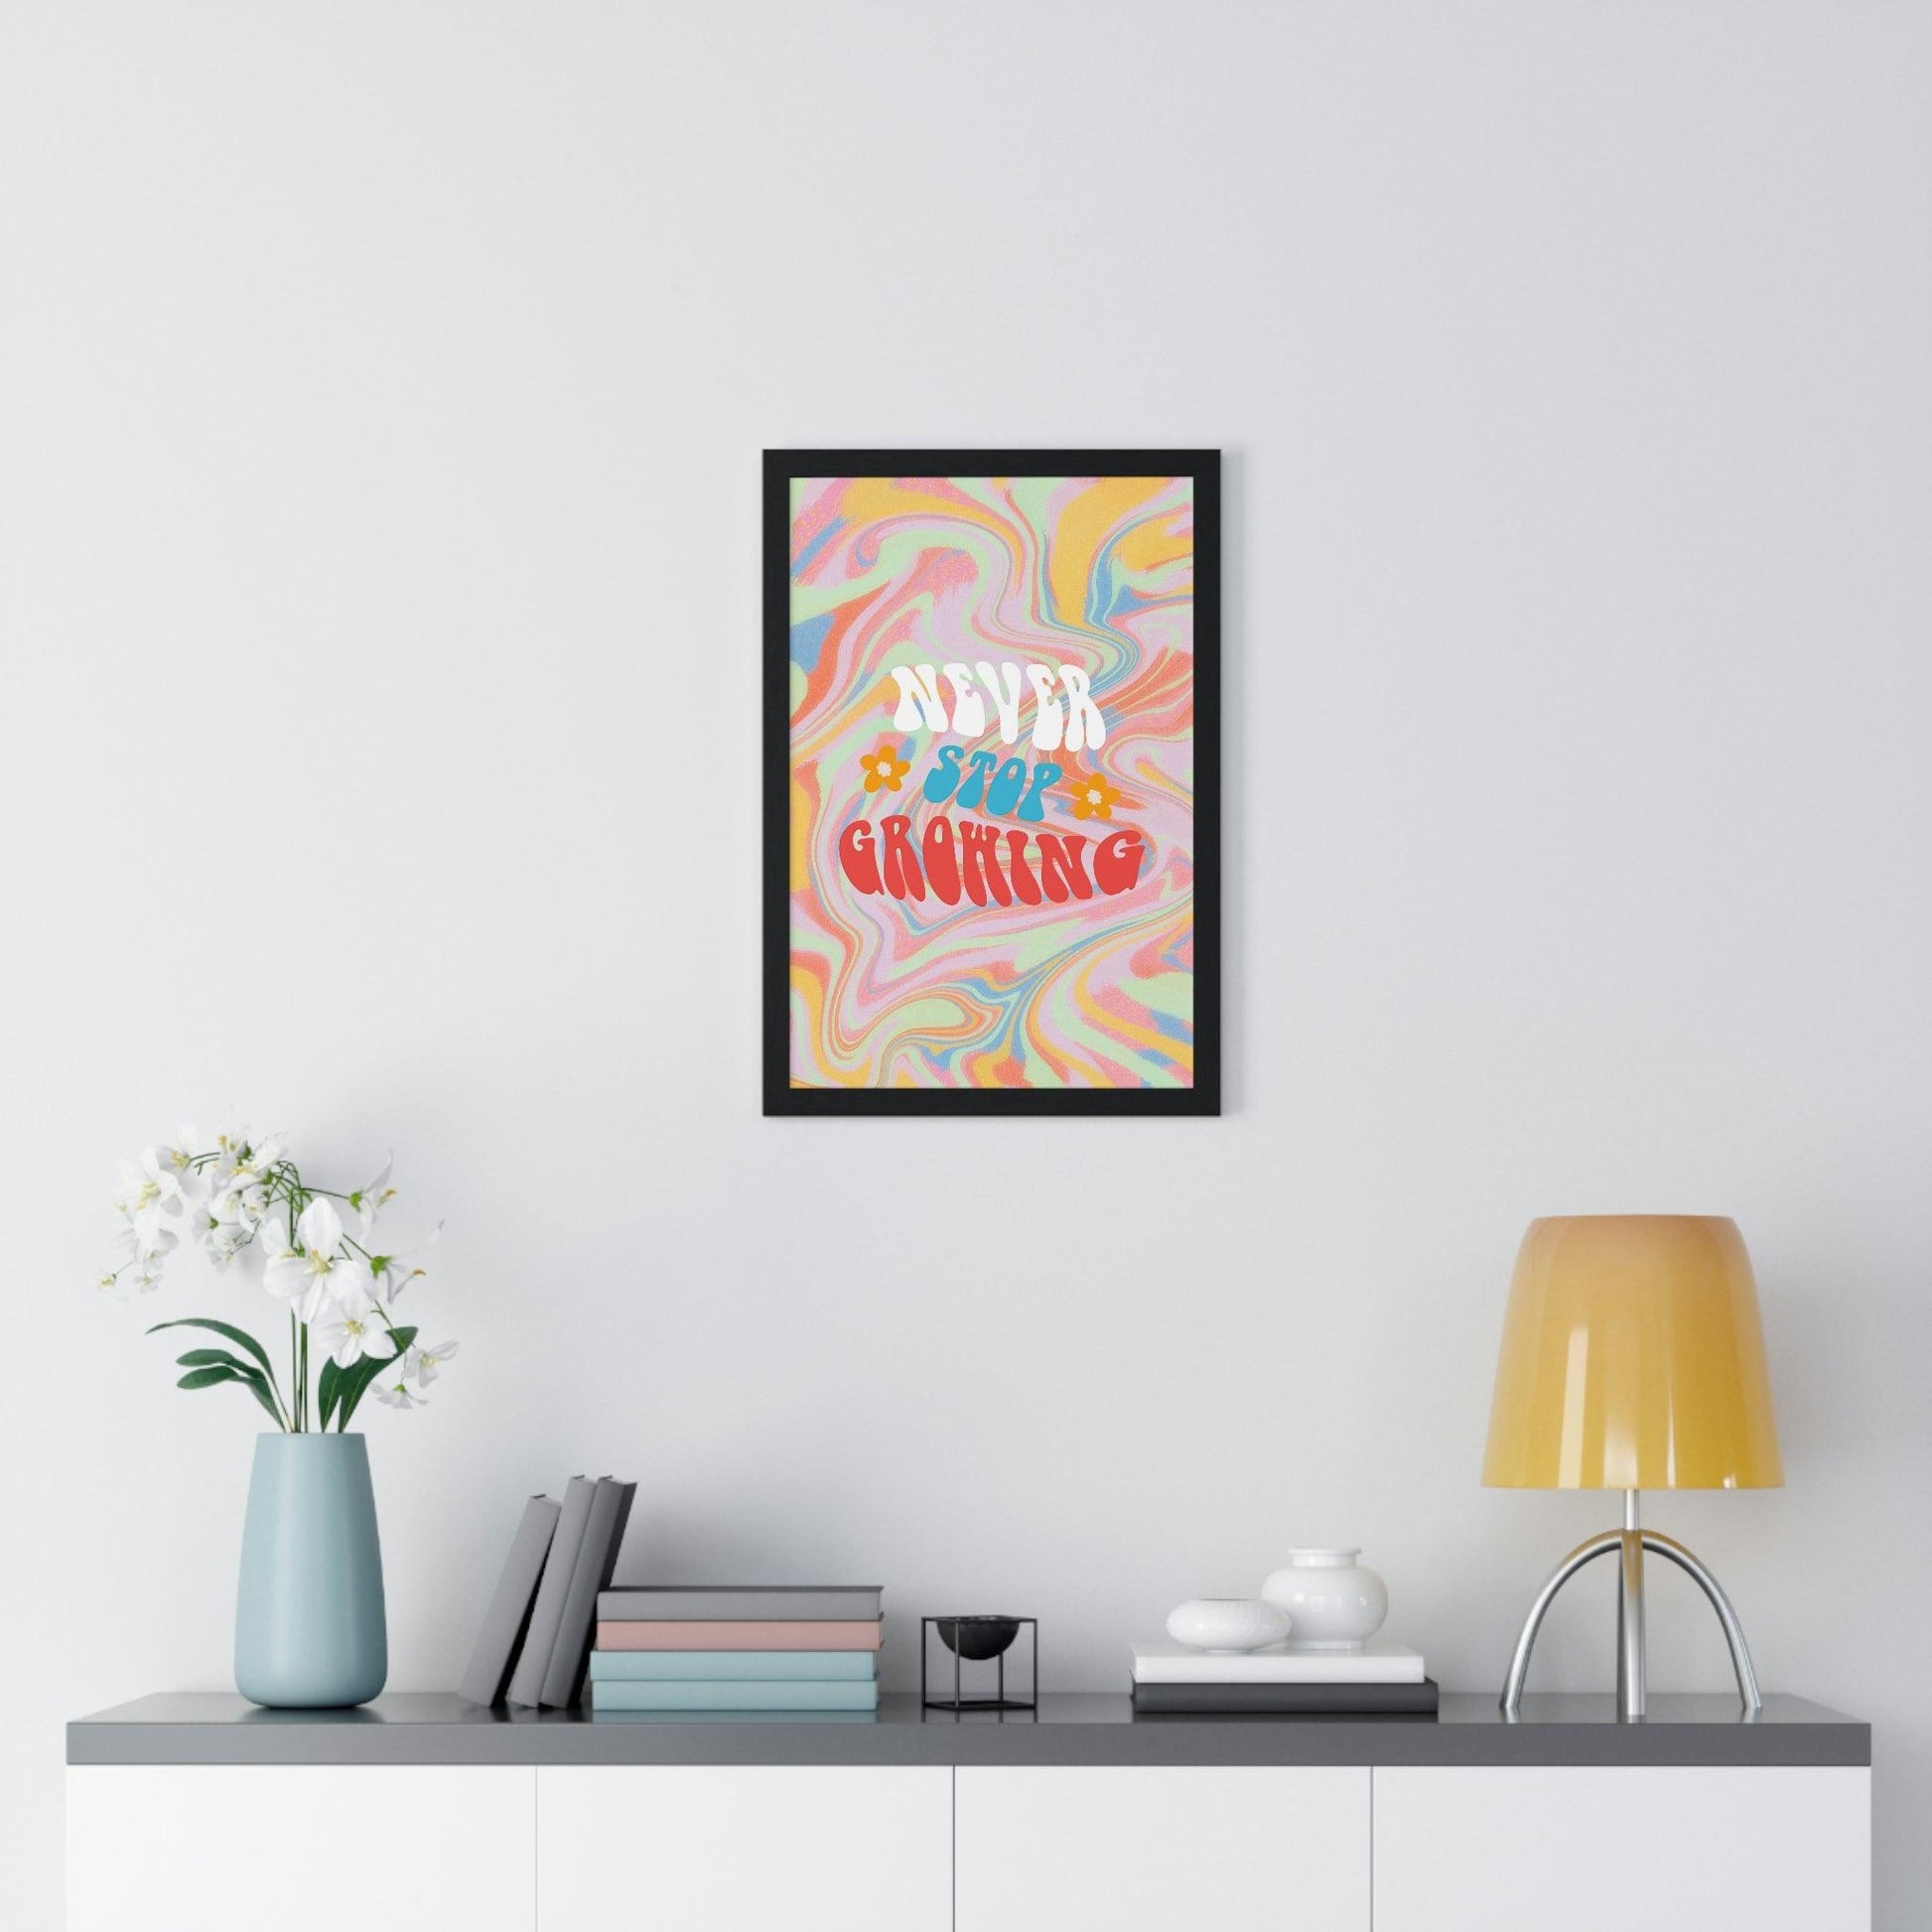 New Stop Growing Poster Print - MAIA HOMES